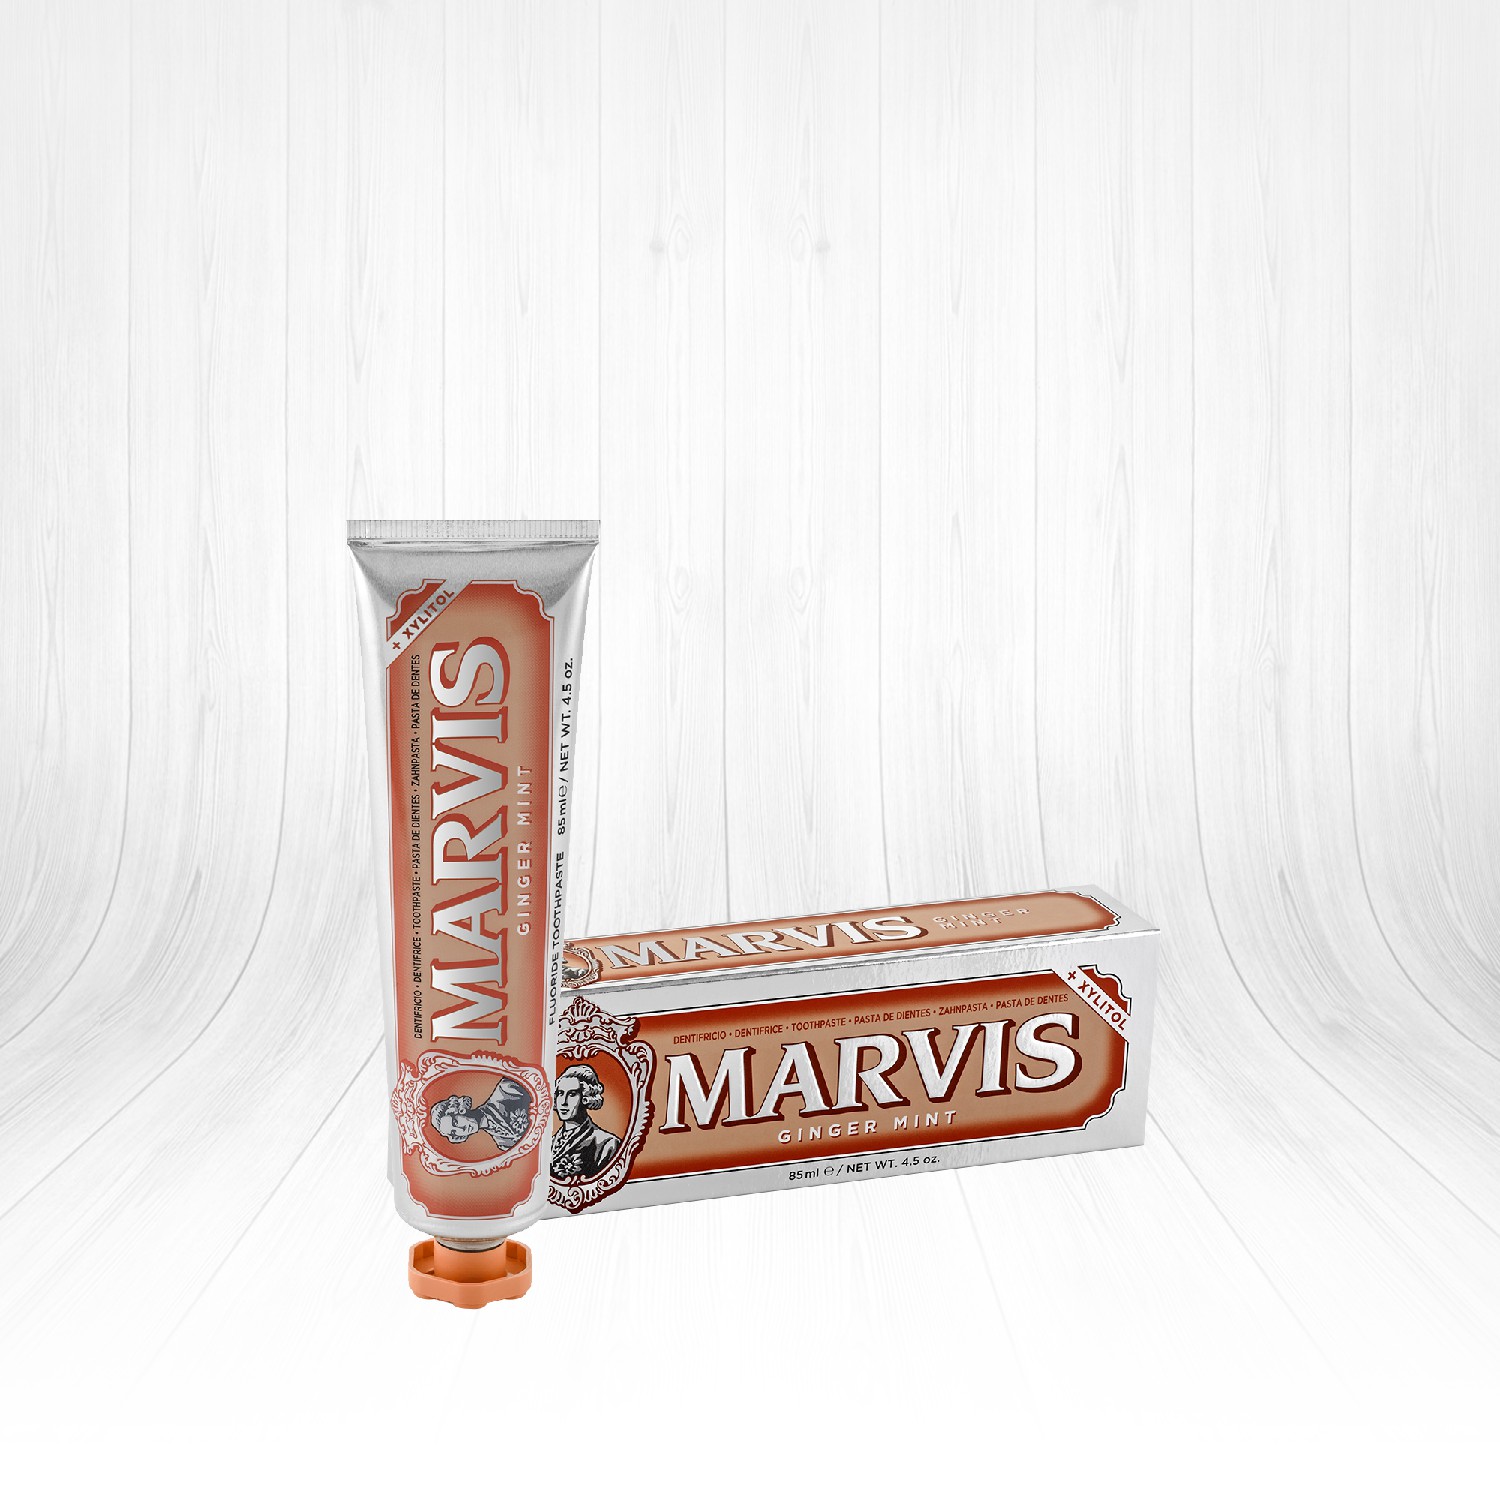 Marvis Ginger Mint + Xylitol Diş Macunu